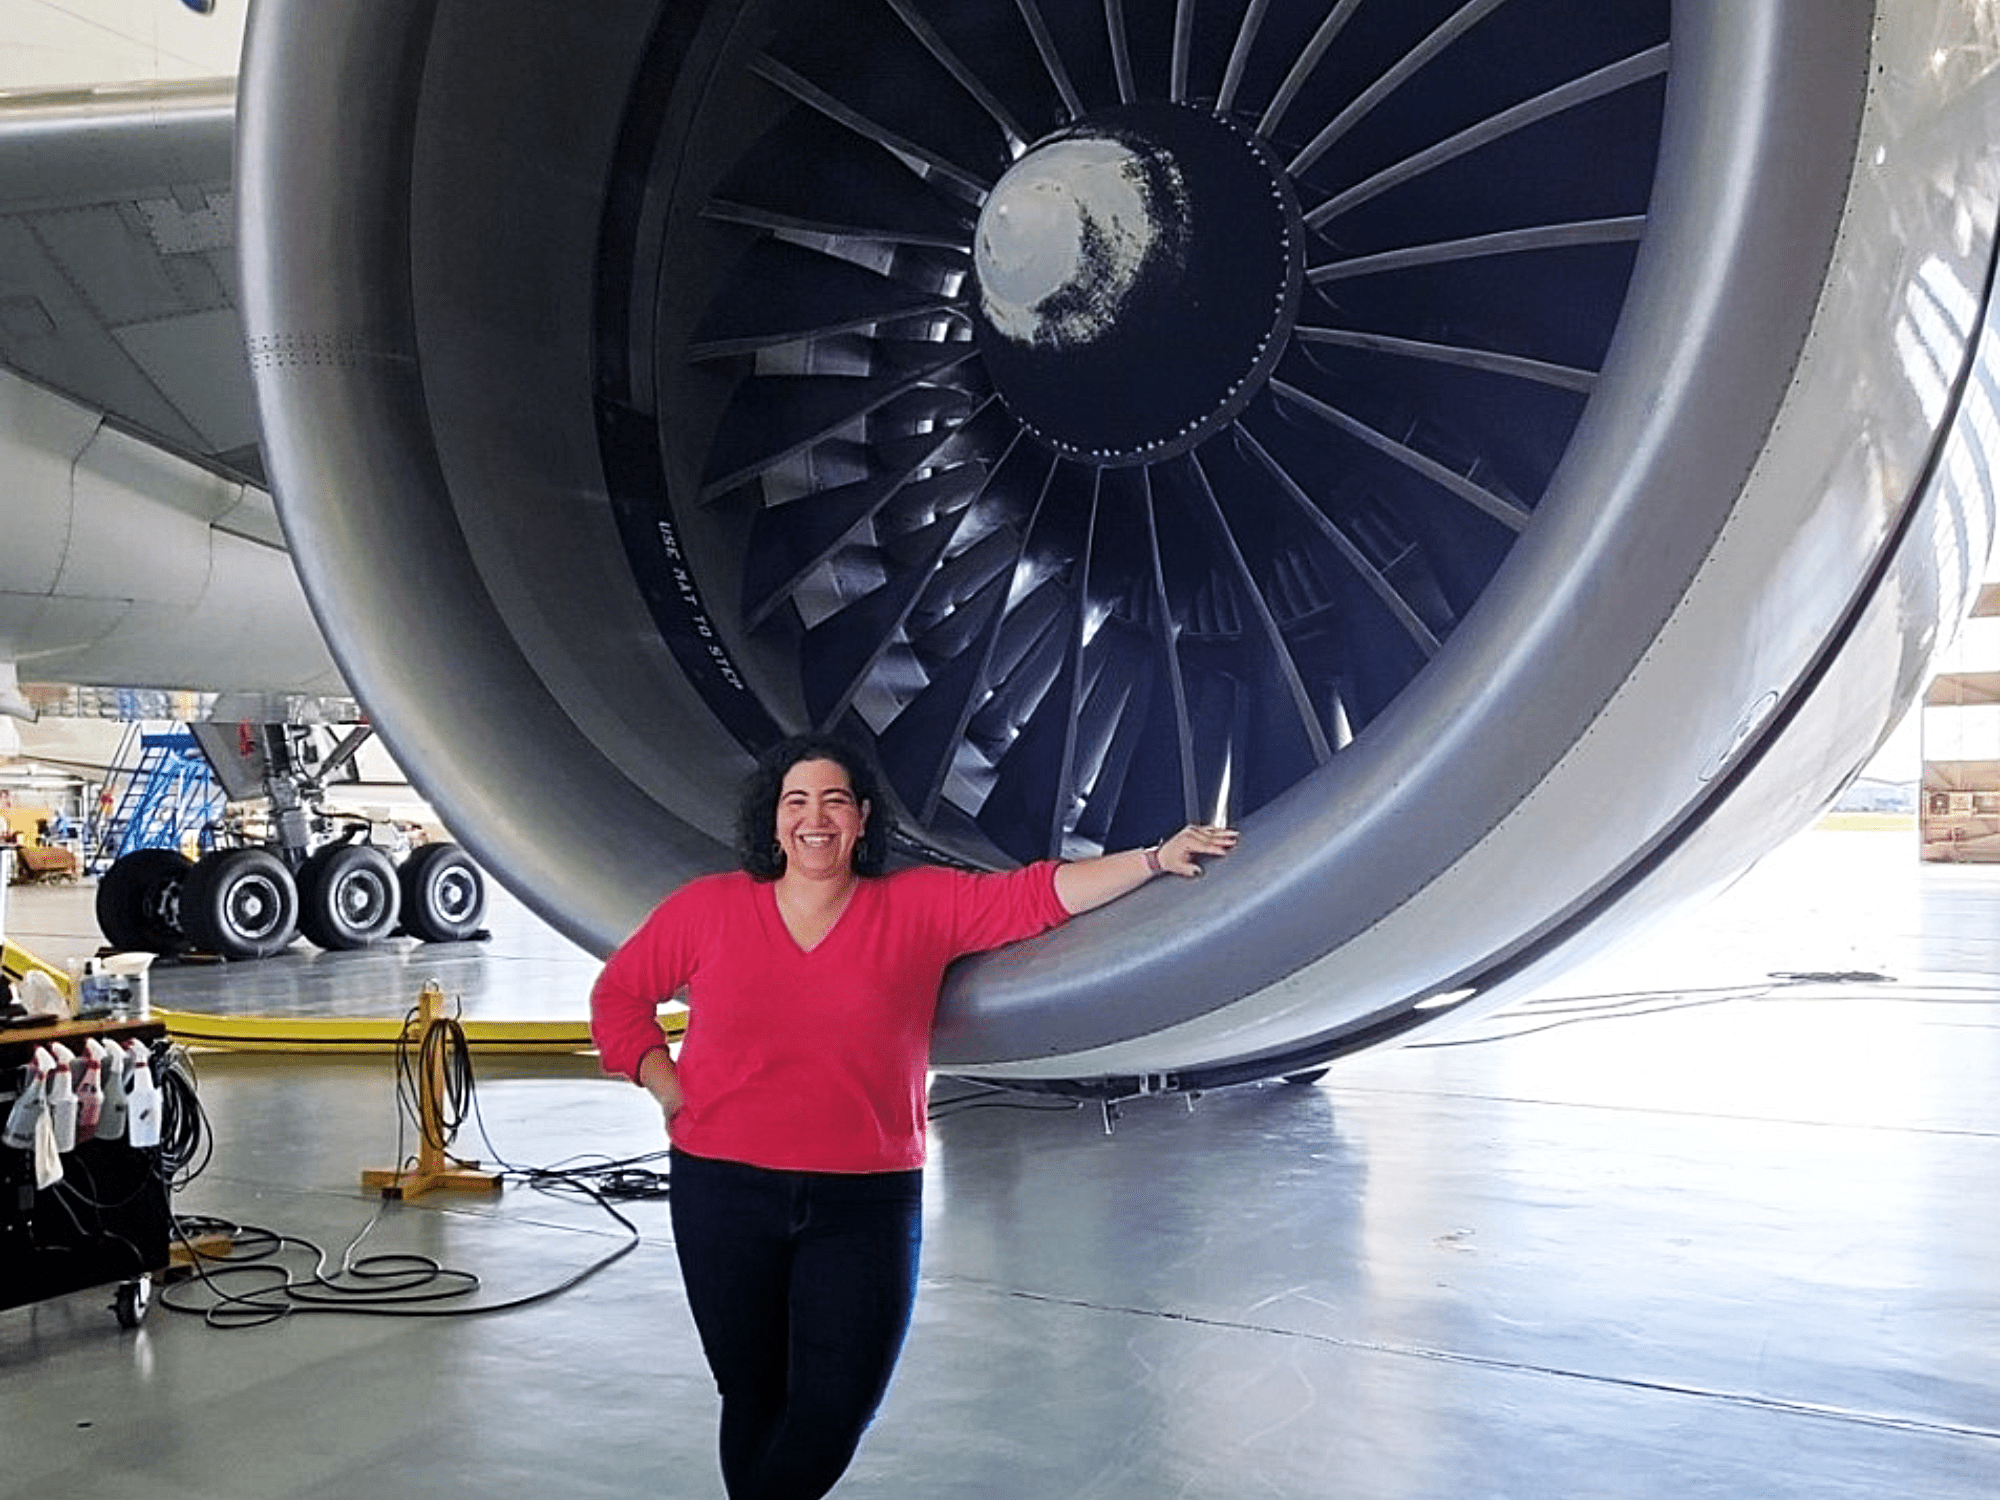 A woman poses in front of an airplane engine.